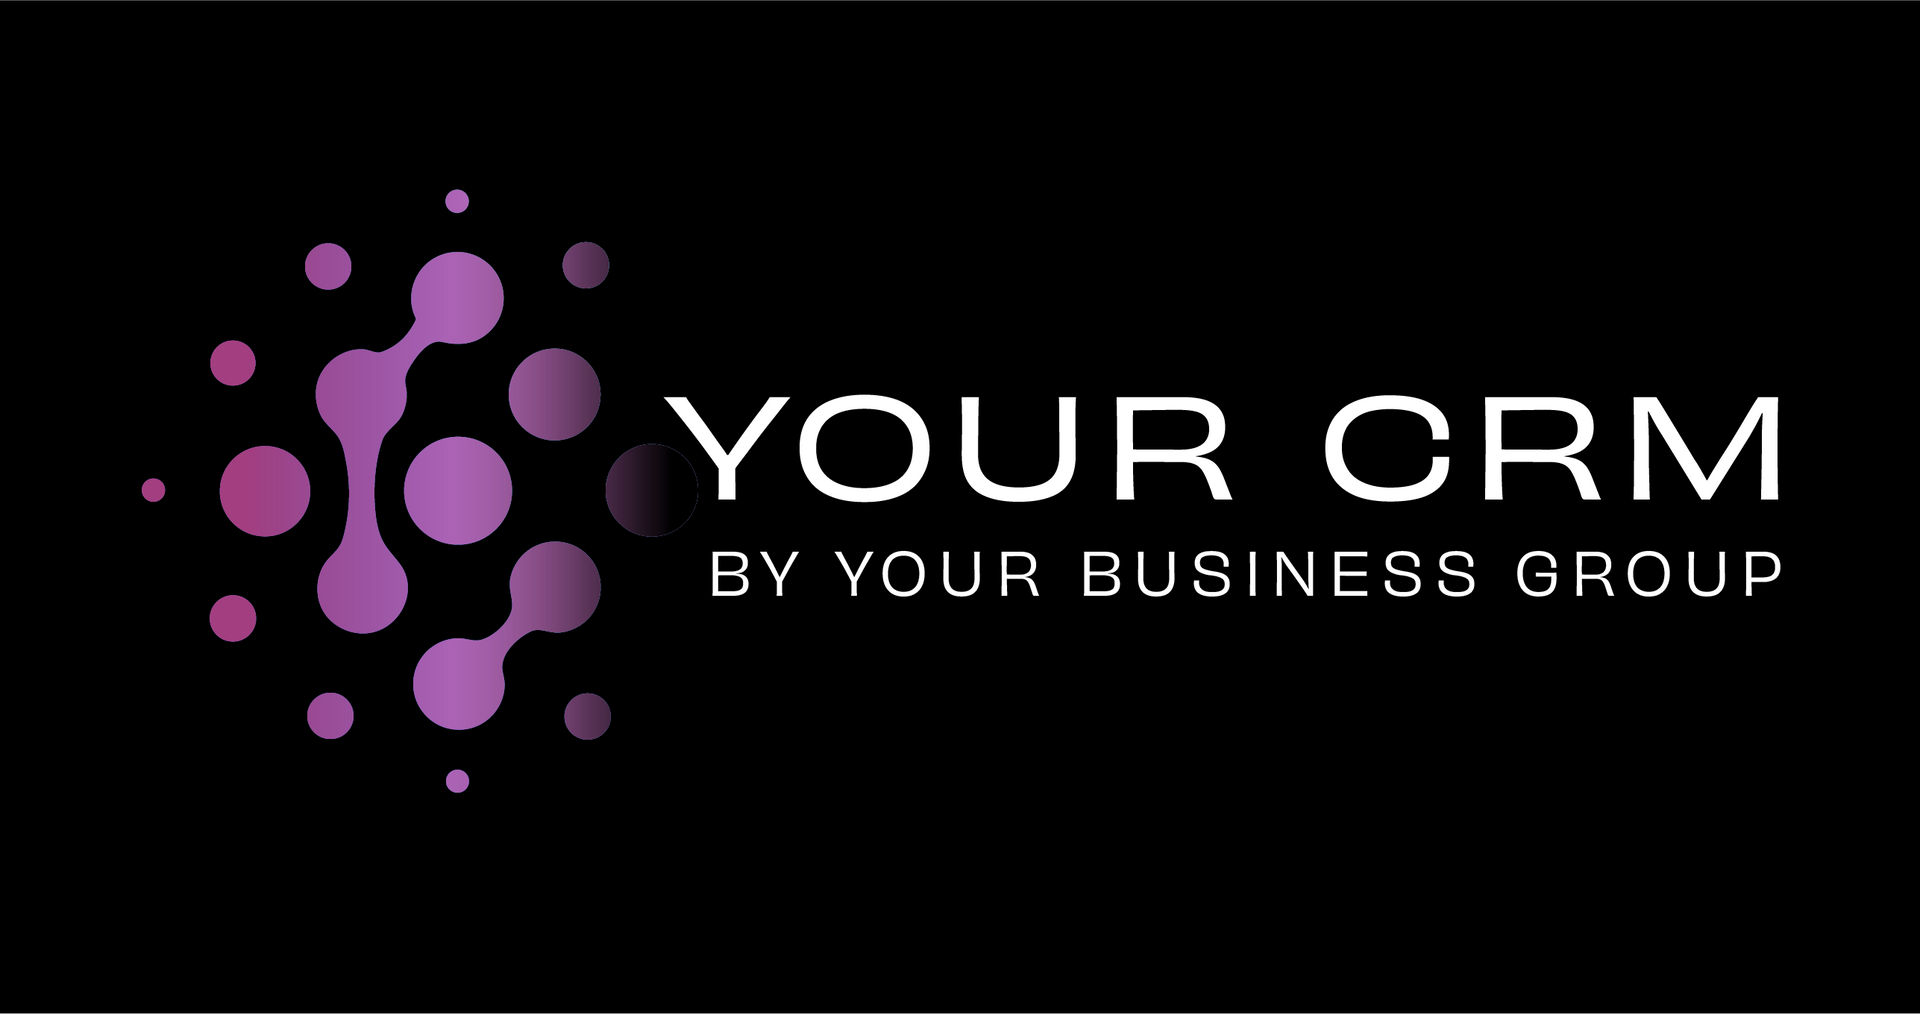 A logo for a company called your crm with purple dots on a black background.